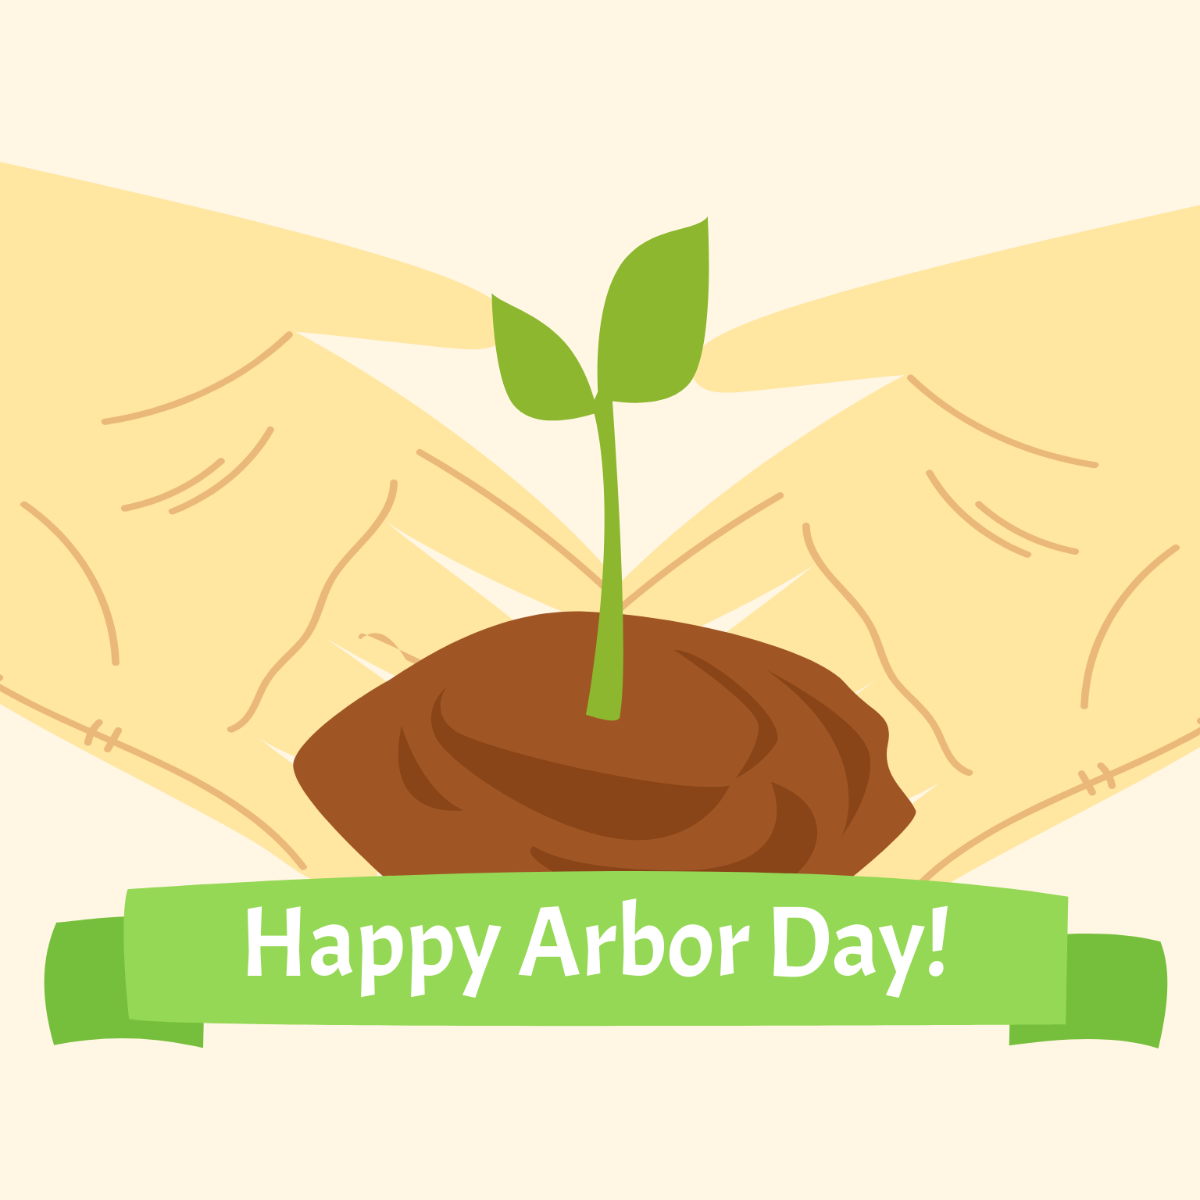 Happy Arbor Day Illustration Template